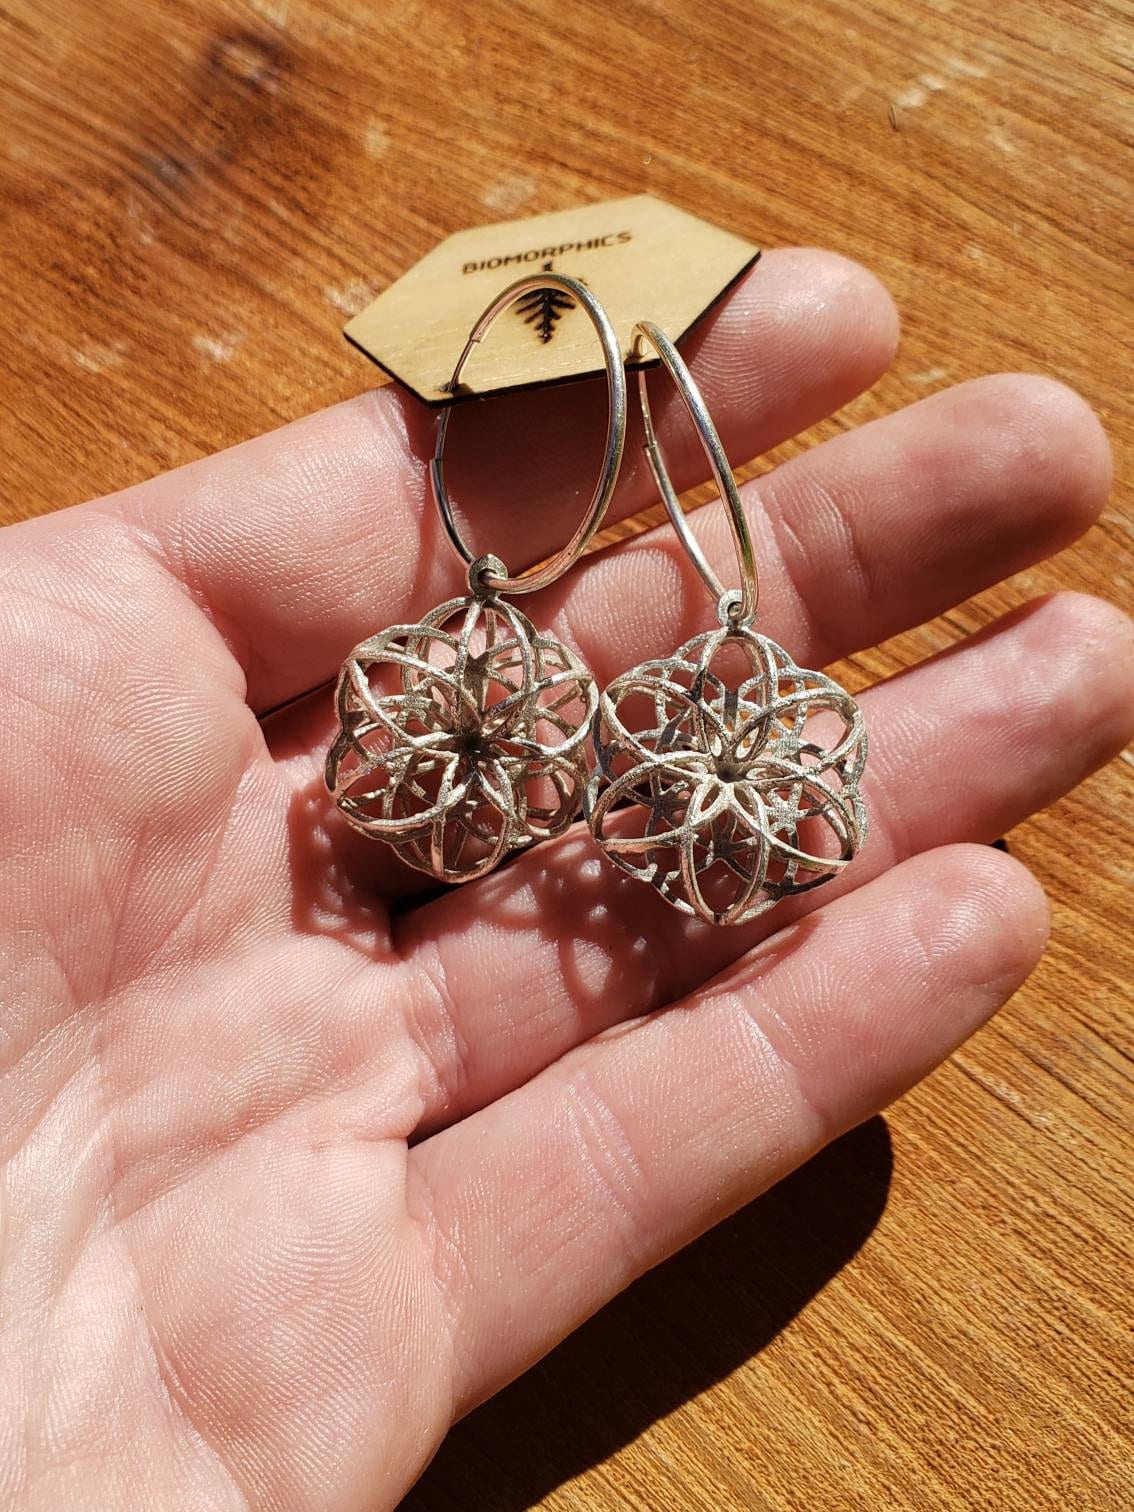 3D Seed Of Life Sacred Geometry Earrings in Recycled Sterling Silver - 3D Printed/Lost Wax Cast Jewelry